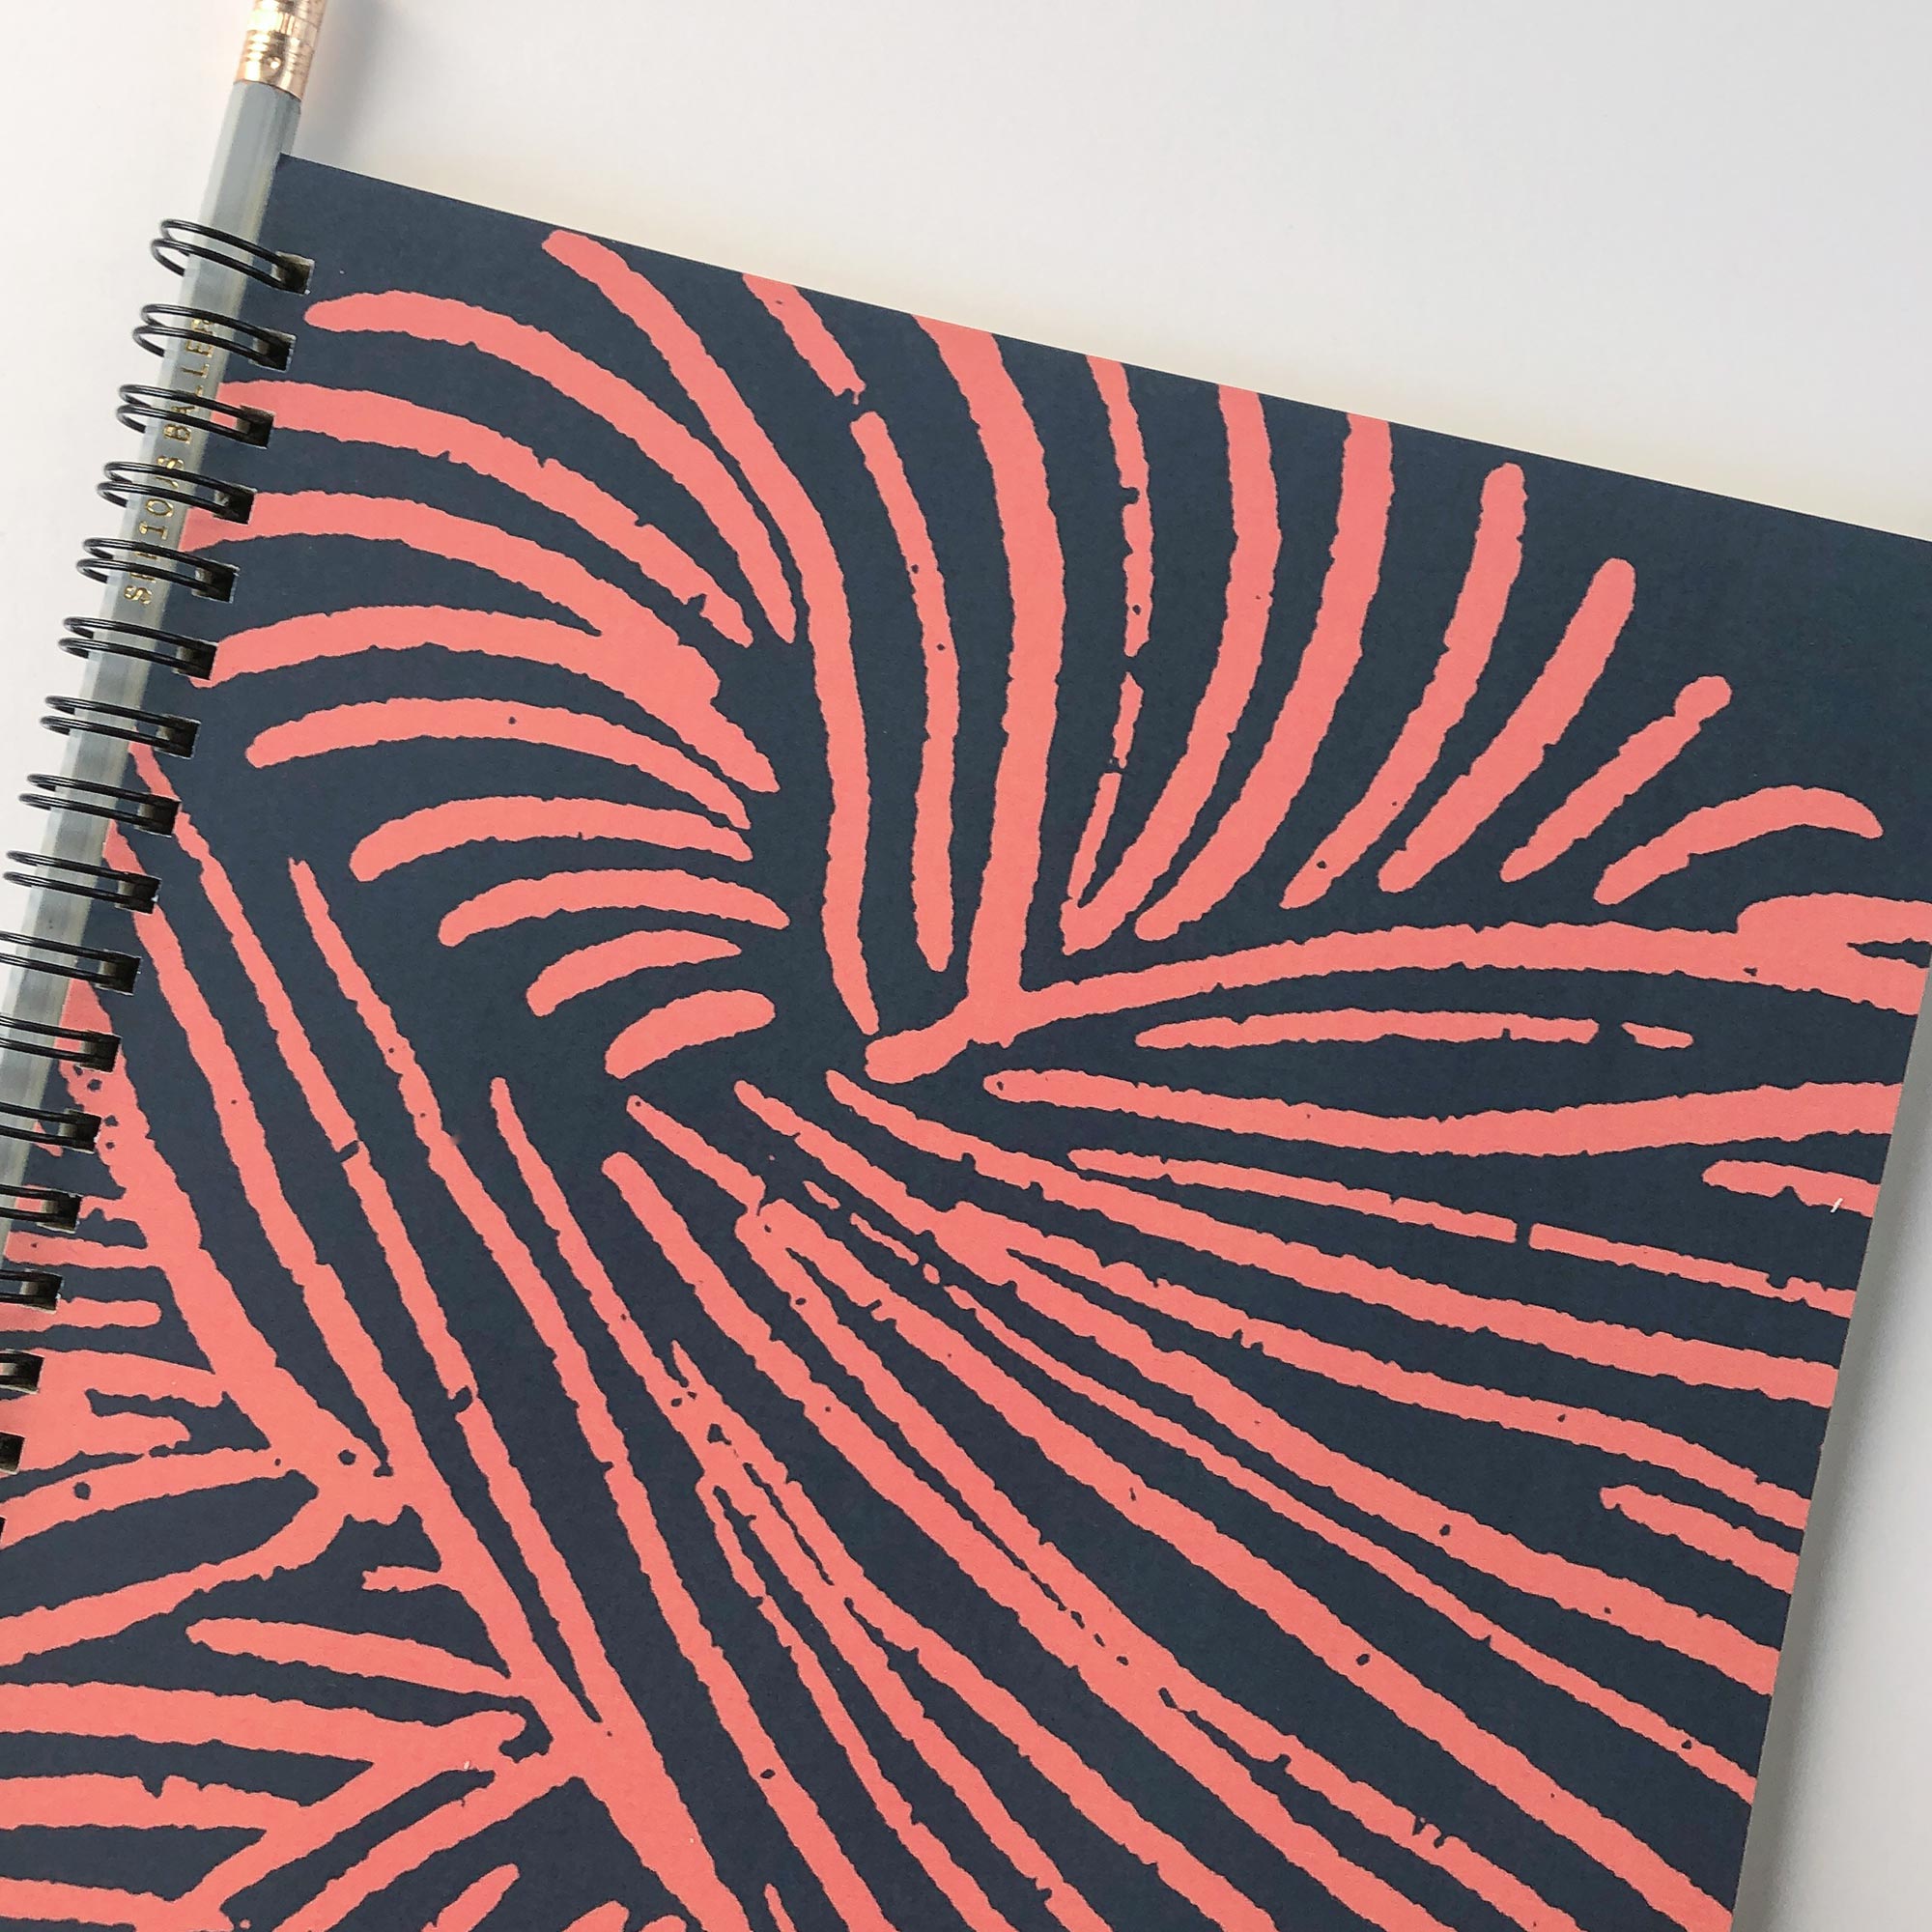 lay flat spiral bound for easy journaling